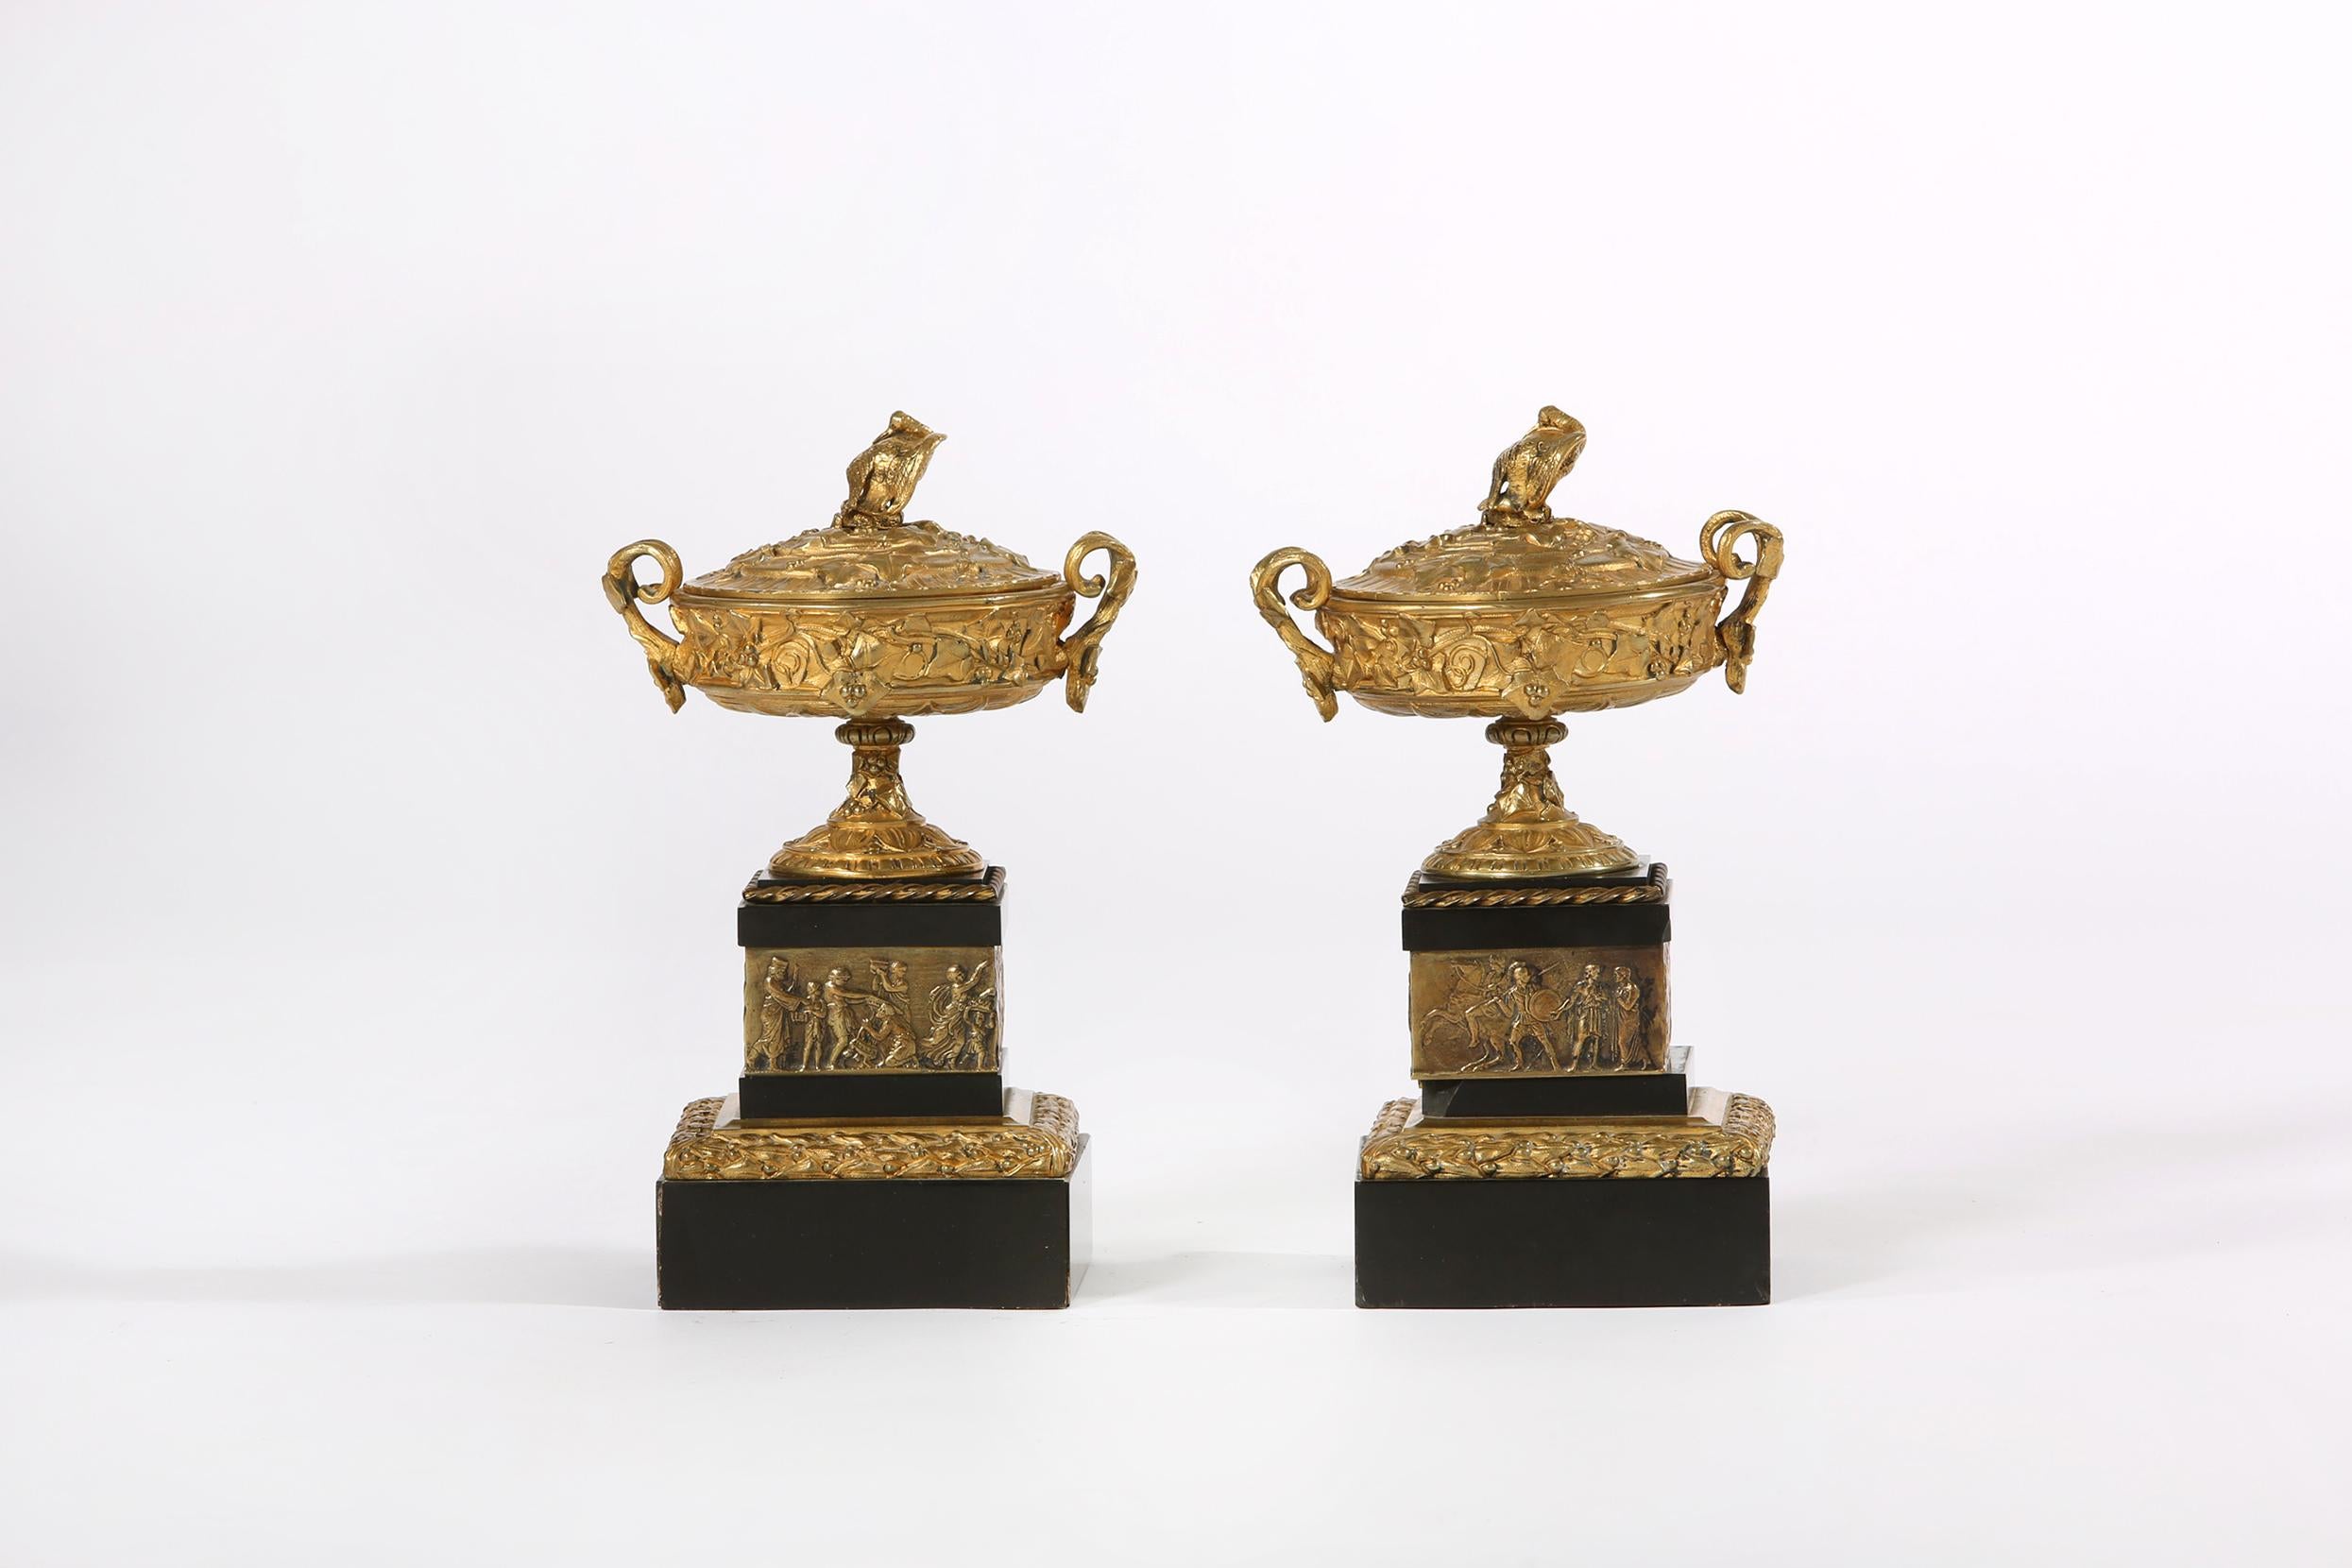 19th century pair of gilt bronze with marble base covered decorative urns / pieces. Each one is in good antique condition with minor loss / chip to marble base. Each decorative urn measures about 10 inches high x 6.5 inches diameter. Base is about 5